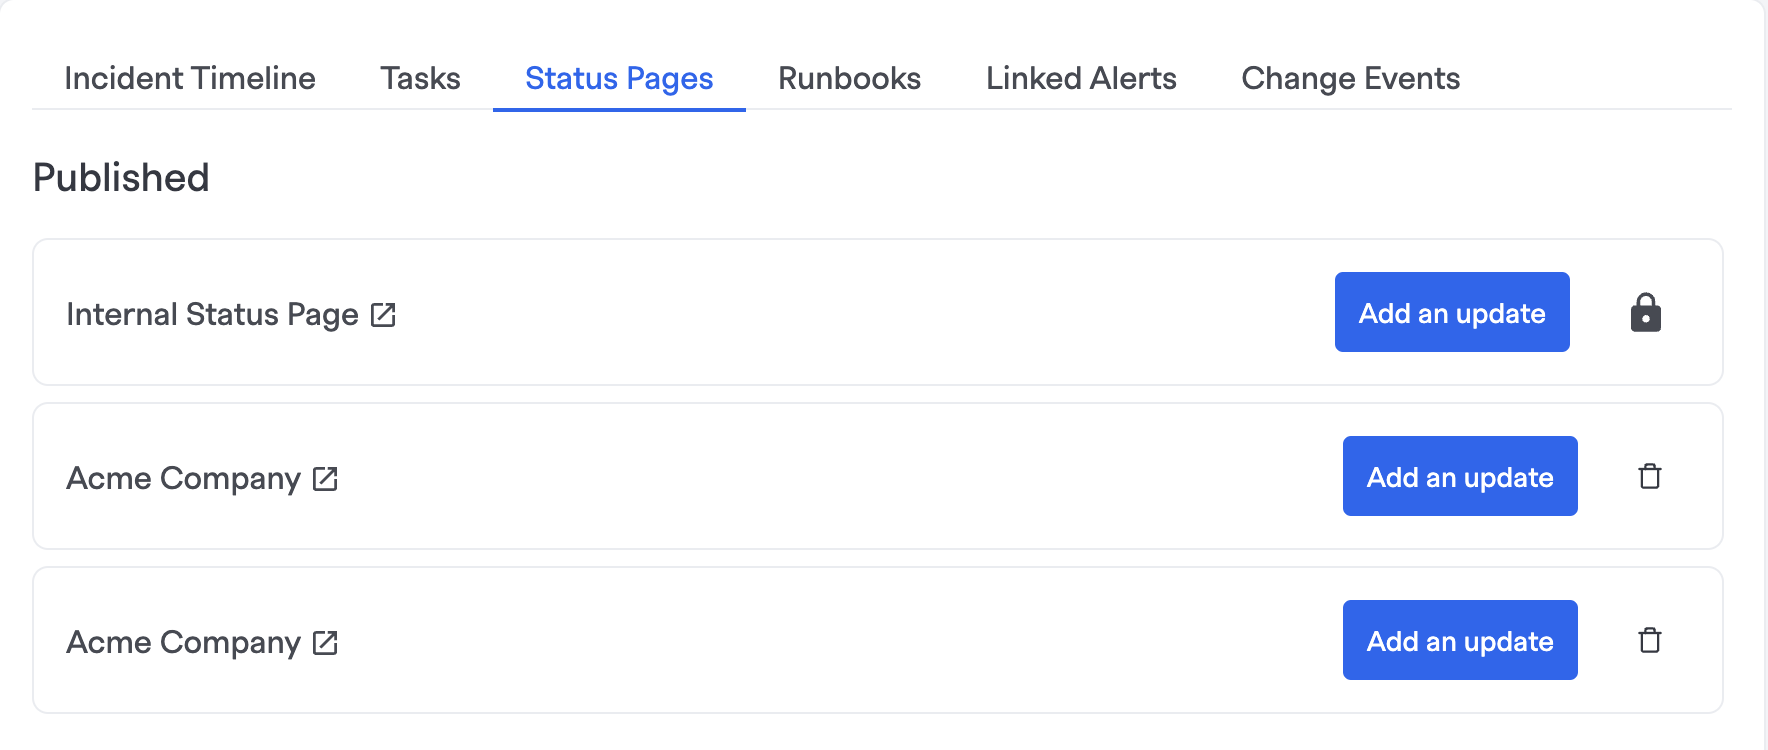 Status Pages tab